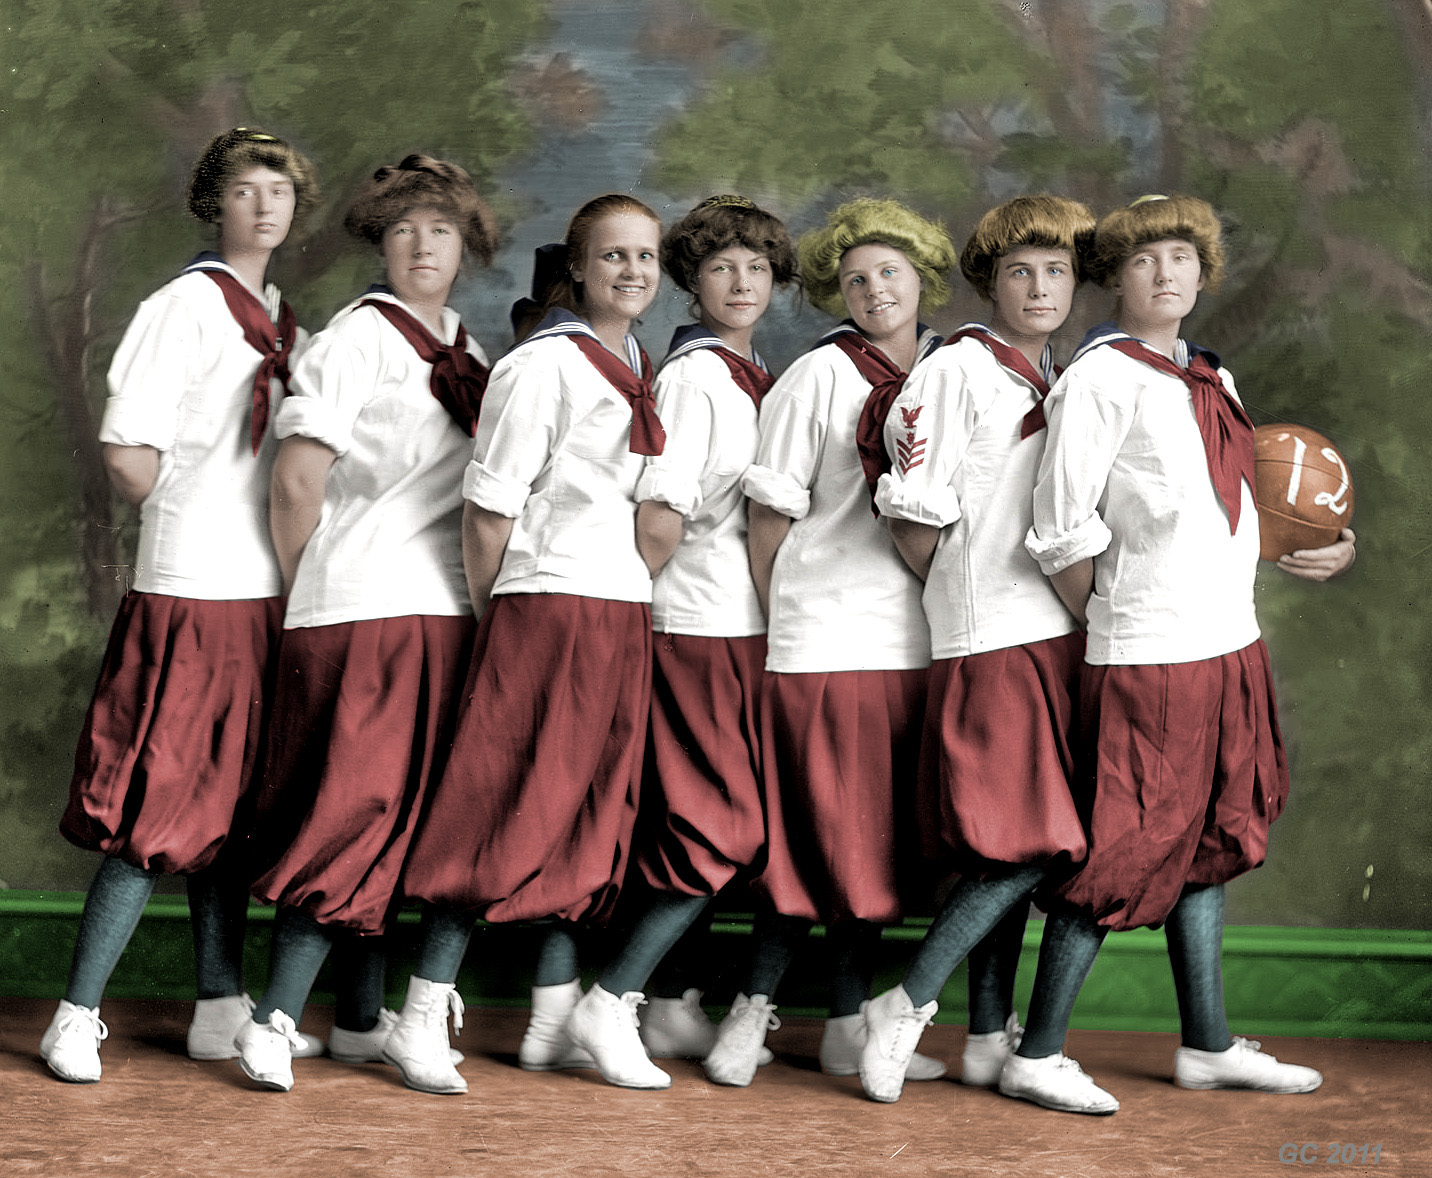 Colorized version. Original black and white image. View full size.